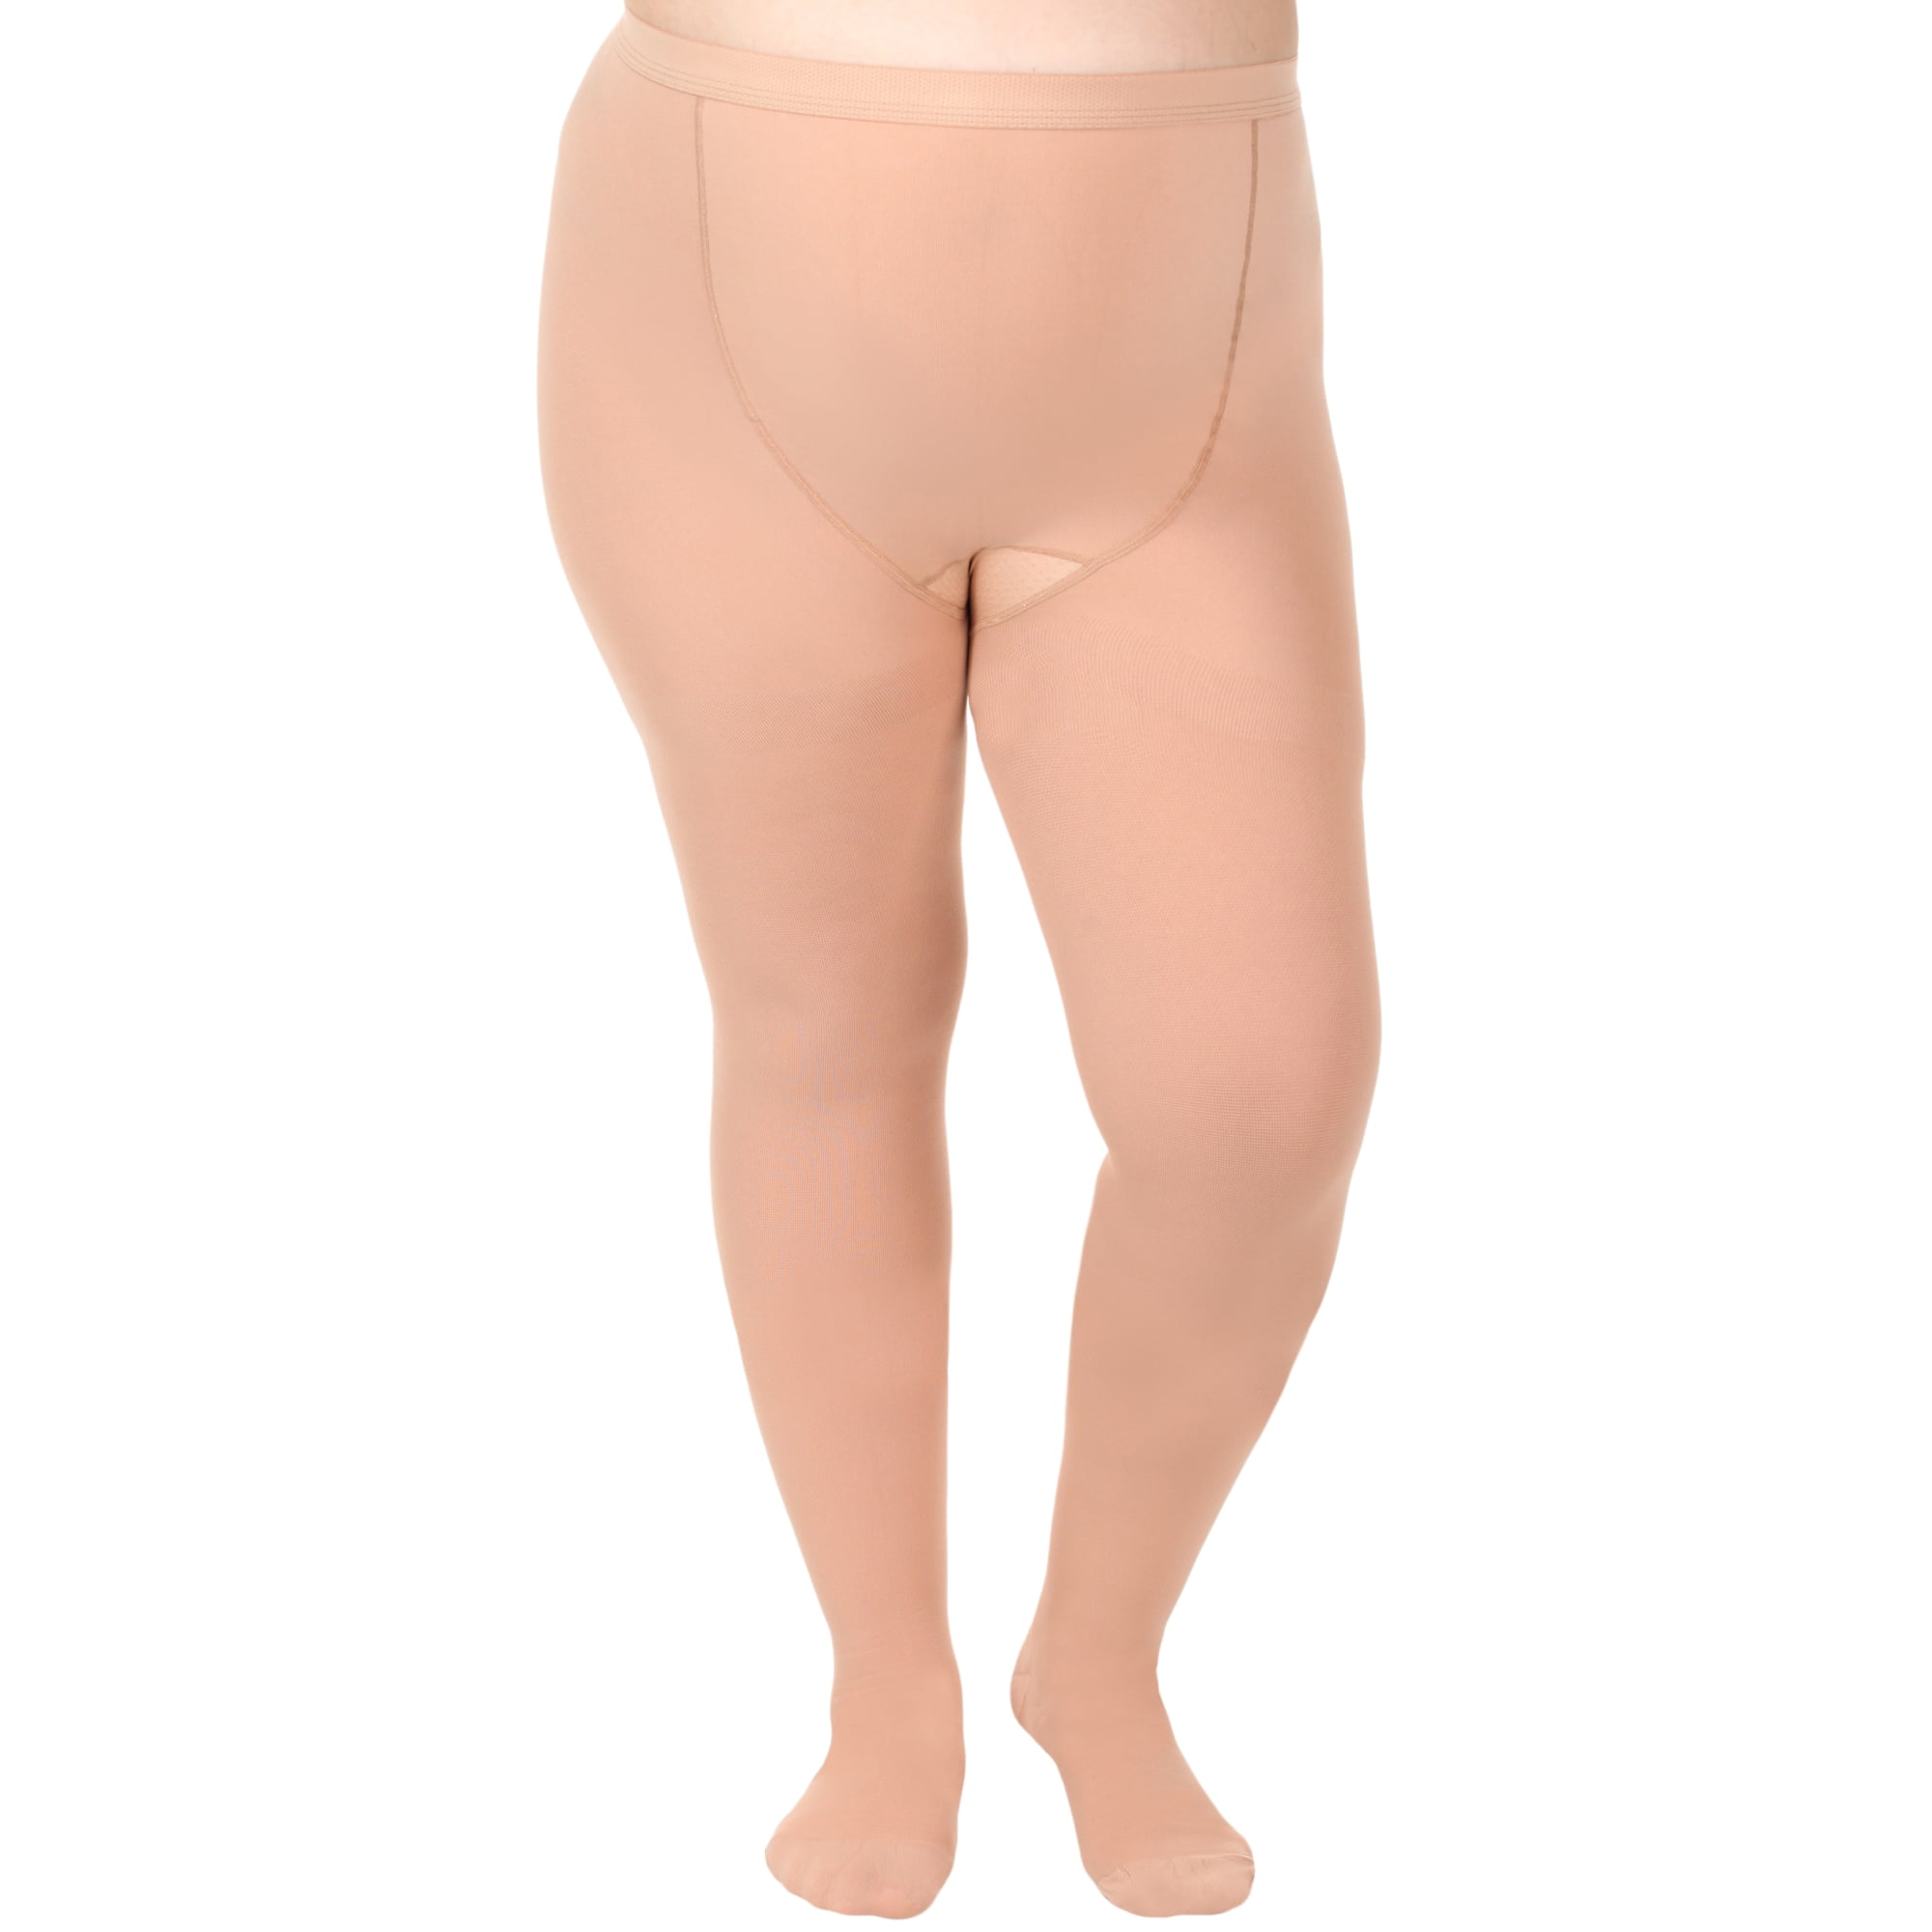 Maternity Compression Tights 20-30mmHg by Absolute Support